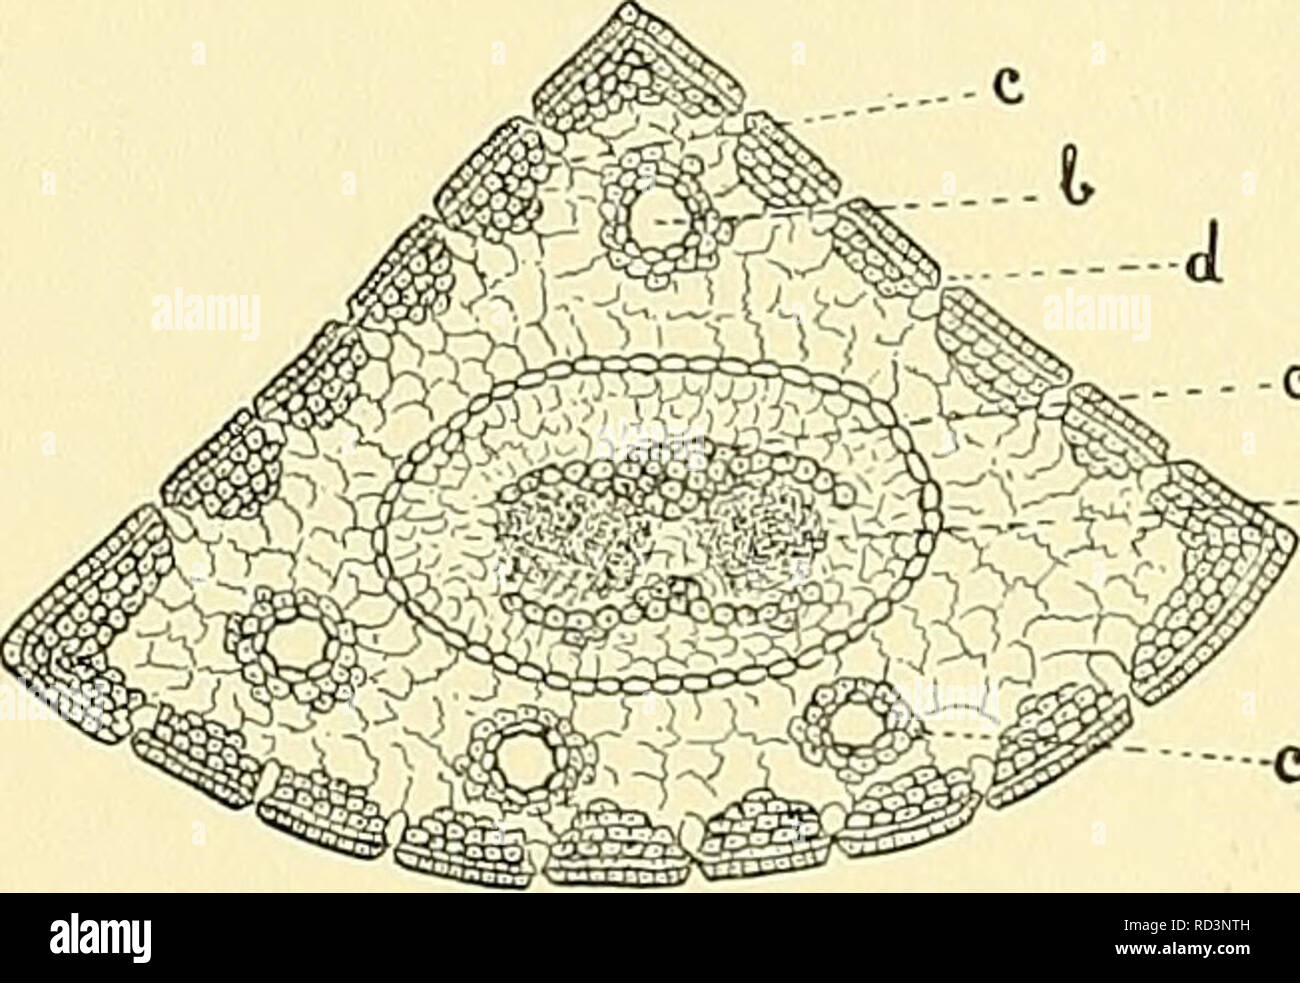 . Cyclopedia of American horticulture, comprising suggestions for cultivation of horticultural plants, descriptions of the species of fruits, vegetables, flowers, and ornamental plants sold in the United States and Canada, together with geographical and biographical sketches. Gardening. 1815. Pinus Strobus. Leaf with a single fibro-vascular bundle (a), usually two peripheral resin-duets {b); strengthening cells (c) only beneath the epidermis; stomata {d) only on the two inner sides. mostly present beneath the epidermis and often sur- round the resin-ducts, sometimes also along the fibro- vascu Stock Photo